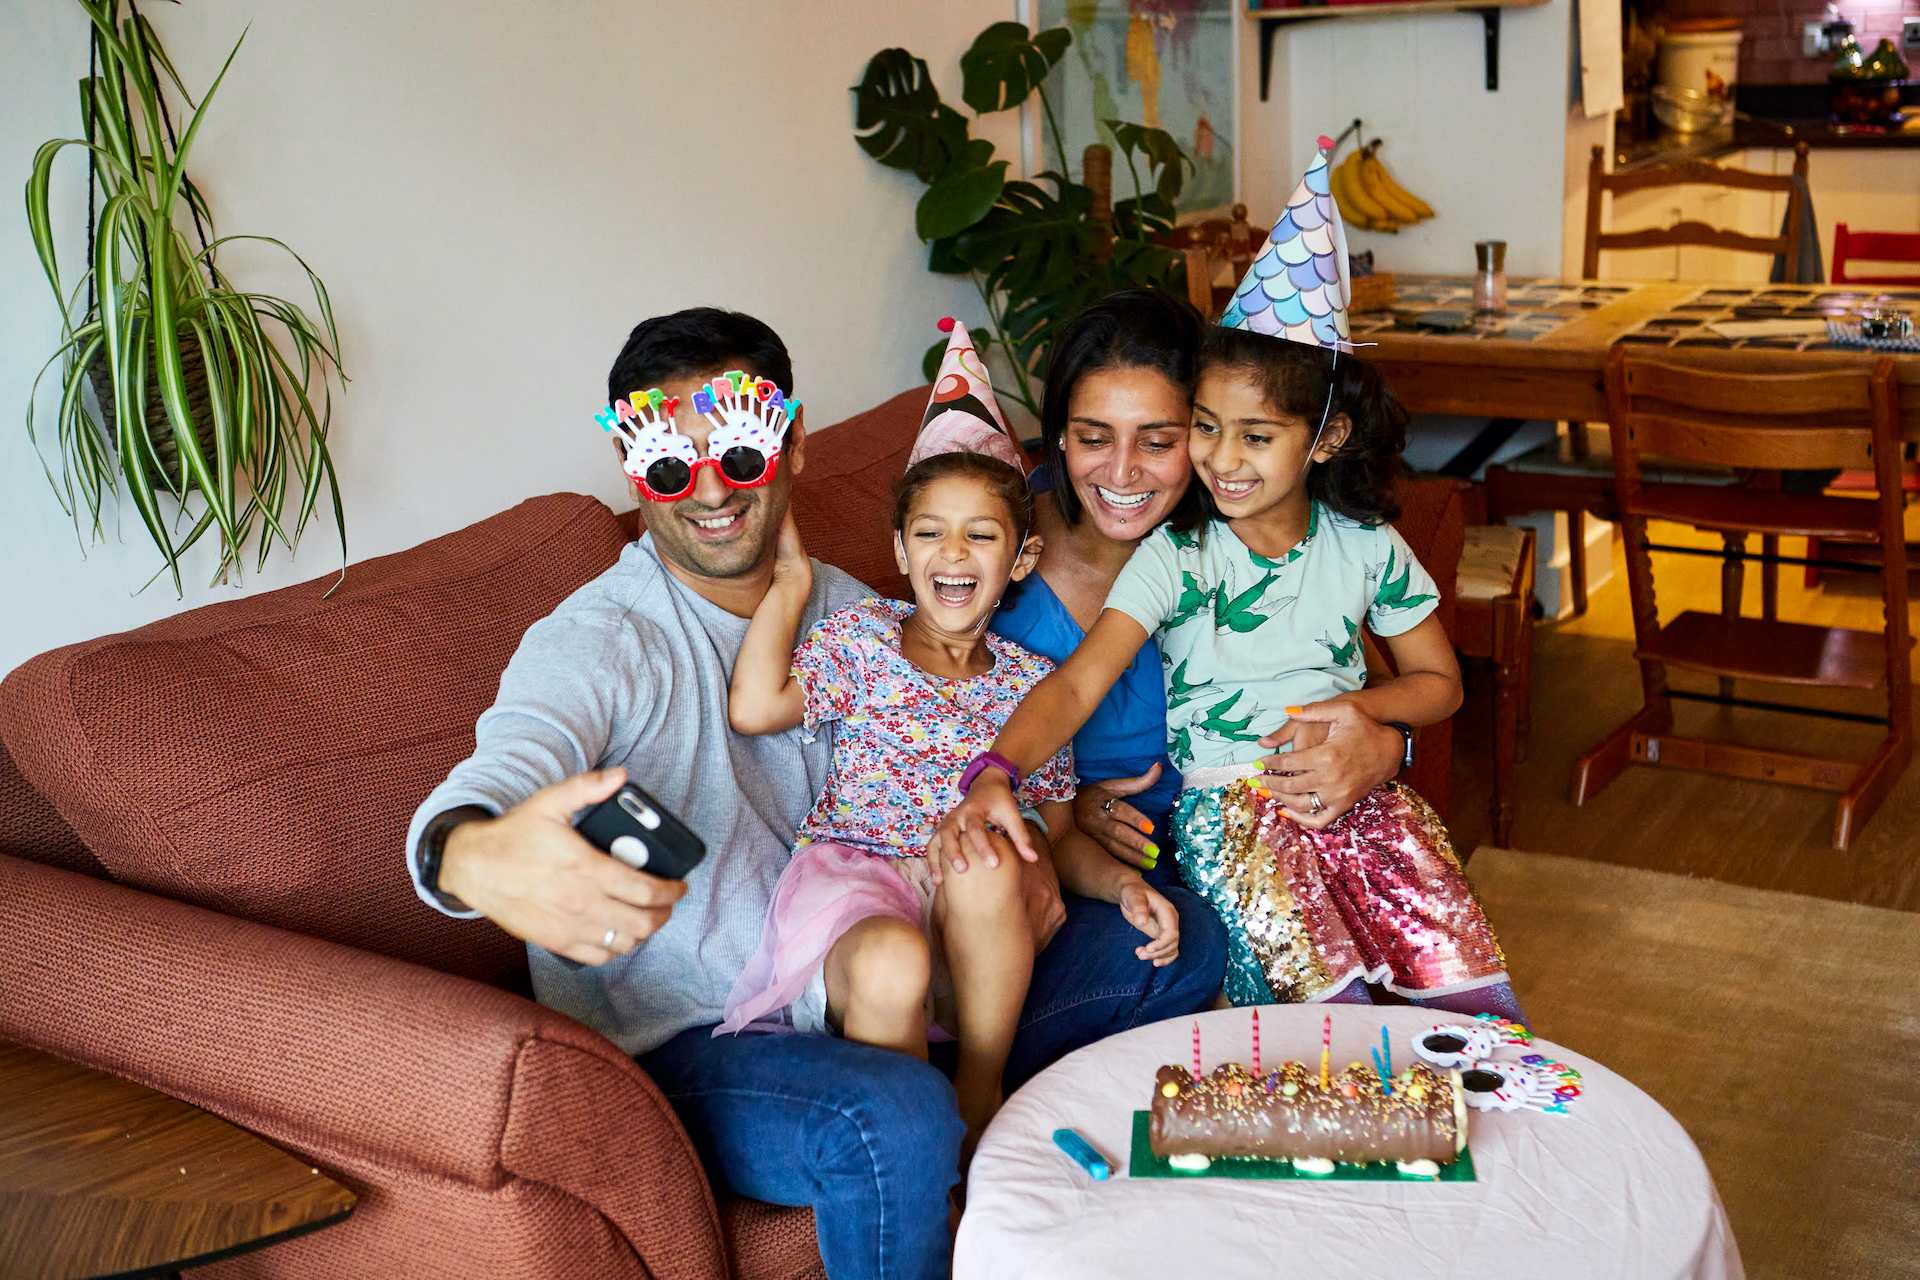 An image of a family laughing at a birthday party